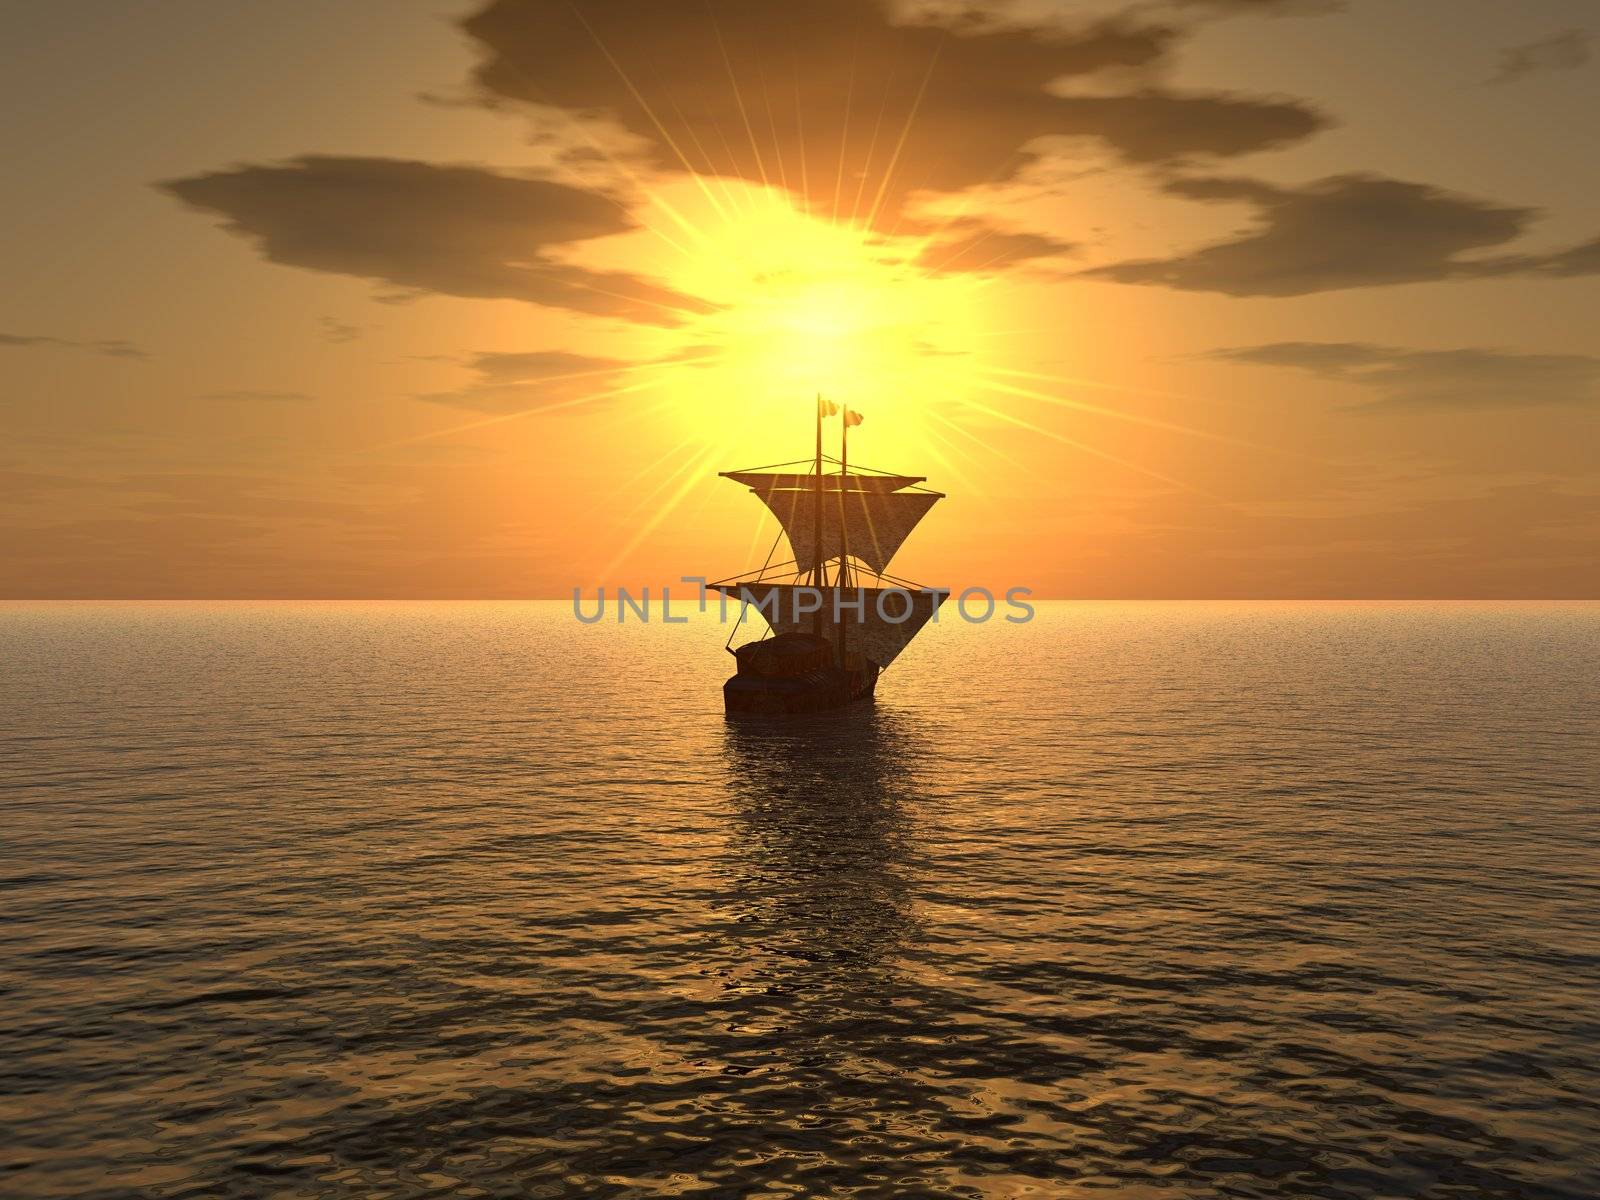 The ship floating in a distance on a background of very effective sunset